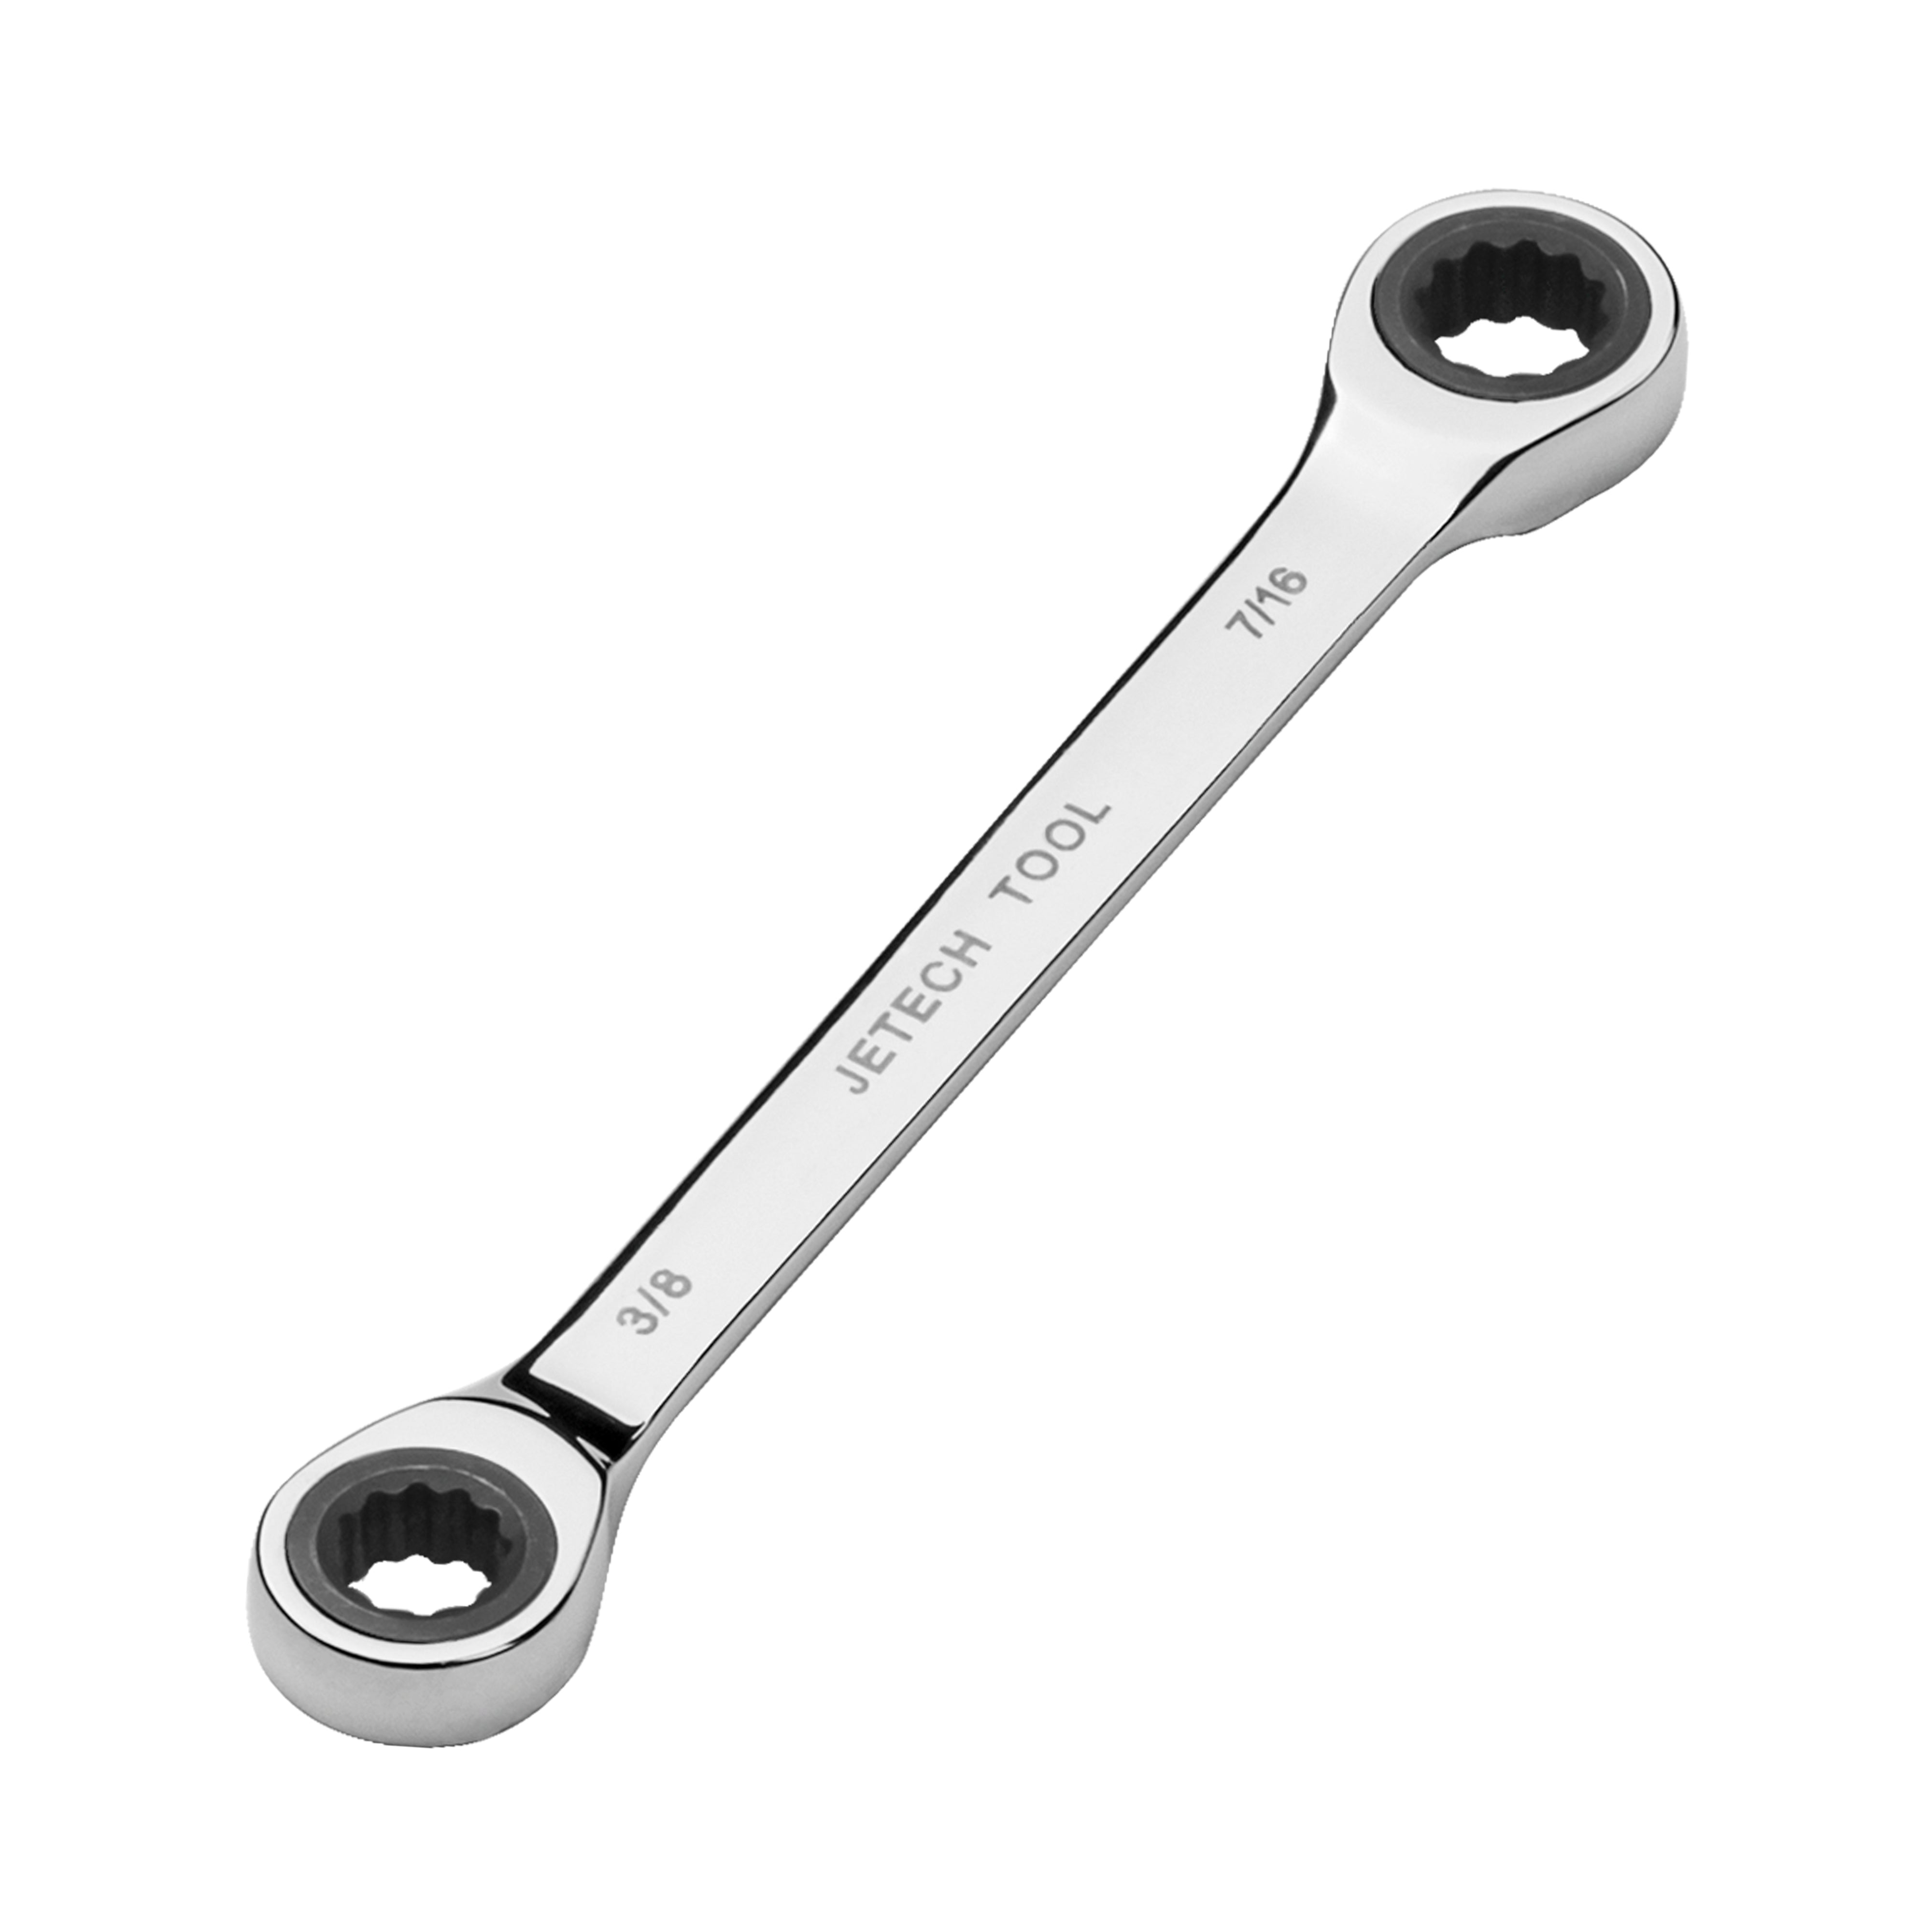 Jetech Double Box End Ratcheting Wrench (3/8 Inch x 7/16 Inch), SAE